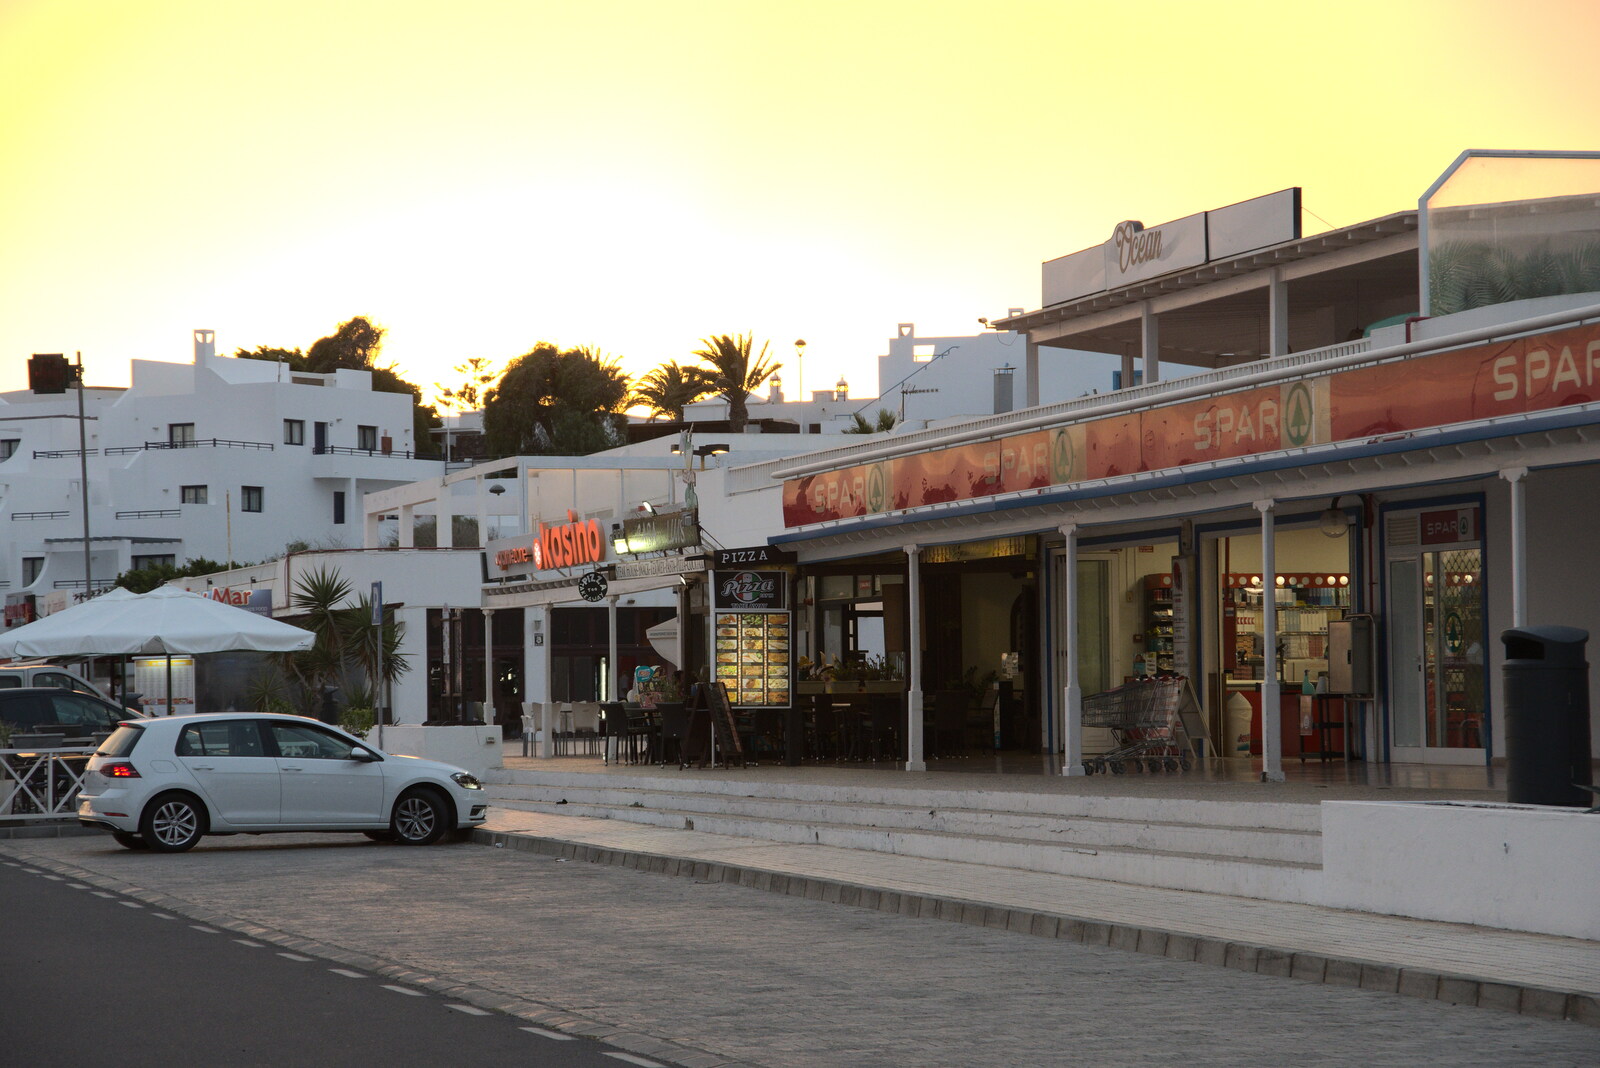 The sun sets over the Spar from Five Days in Lanzarote, Canary Islands, Spain - 24th October 2021